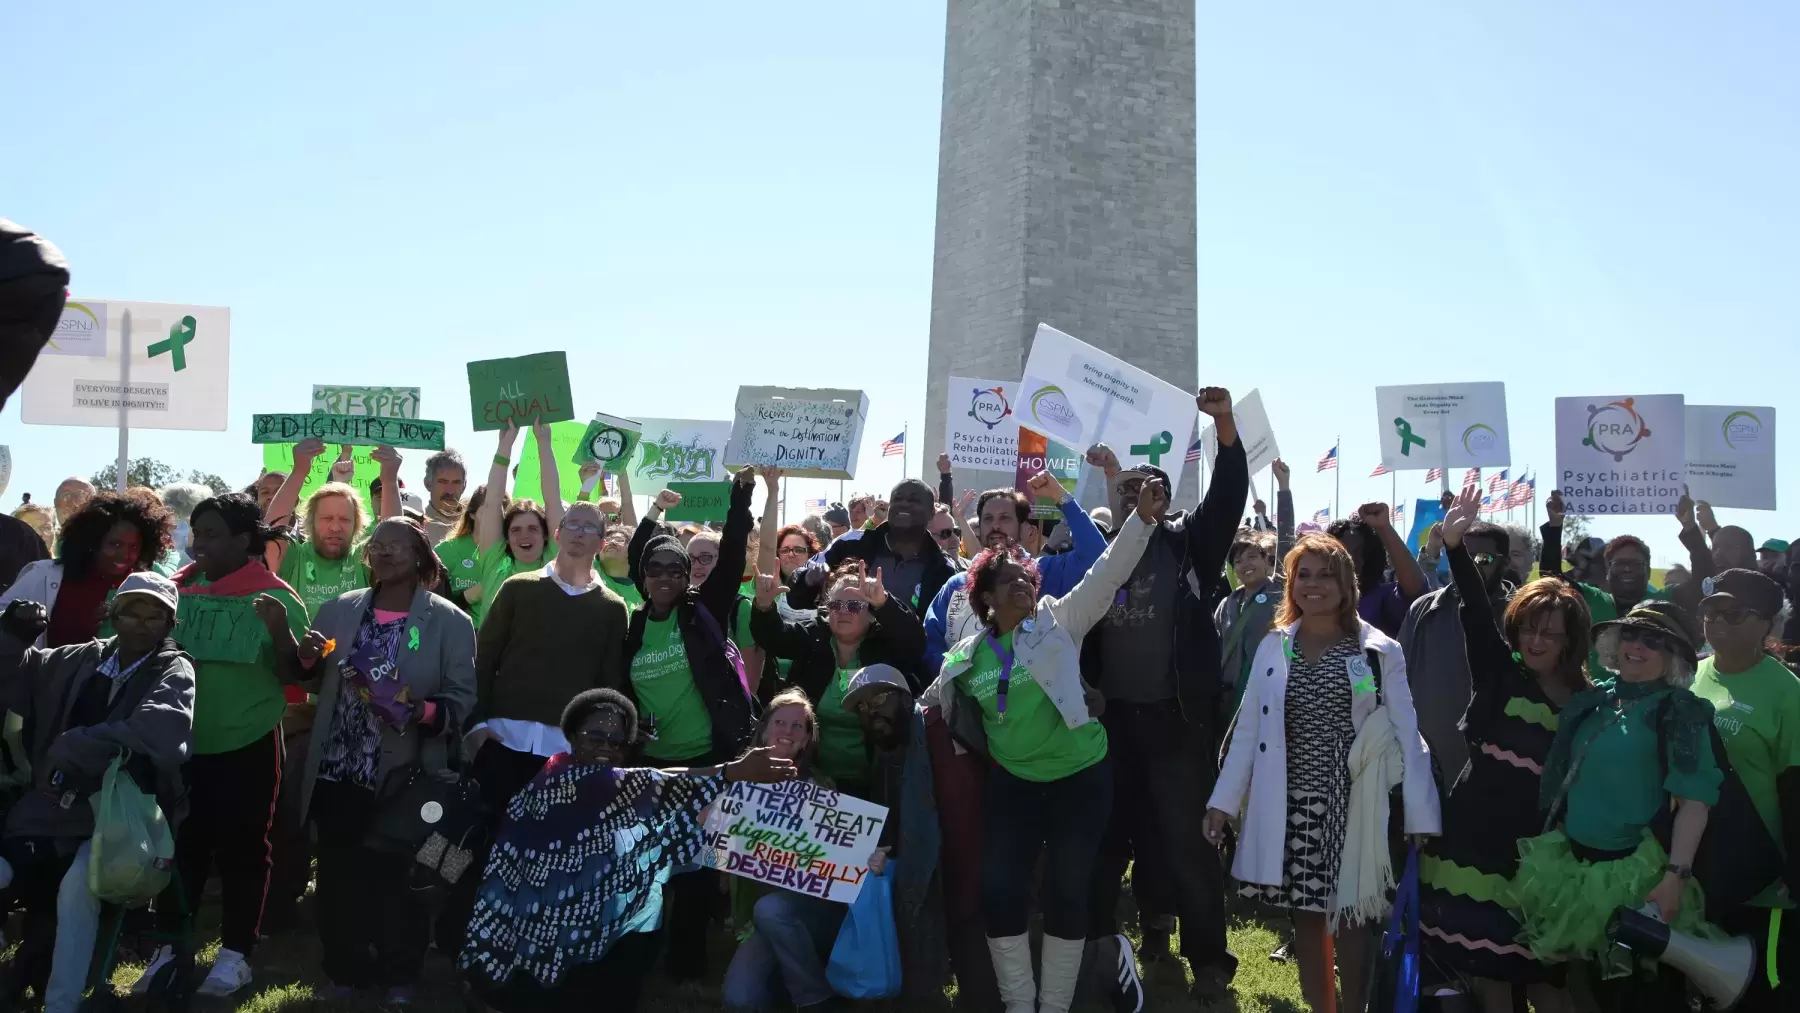 group of people in lots of light green shirts carrying posters and placards in front of Washington Monument